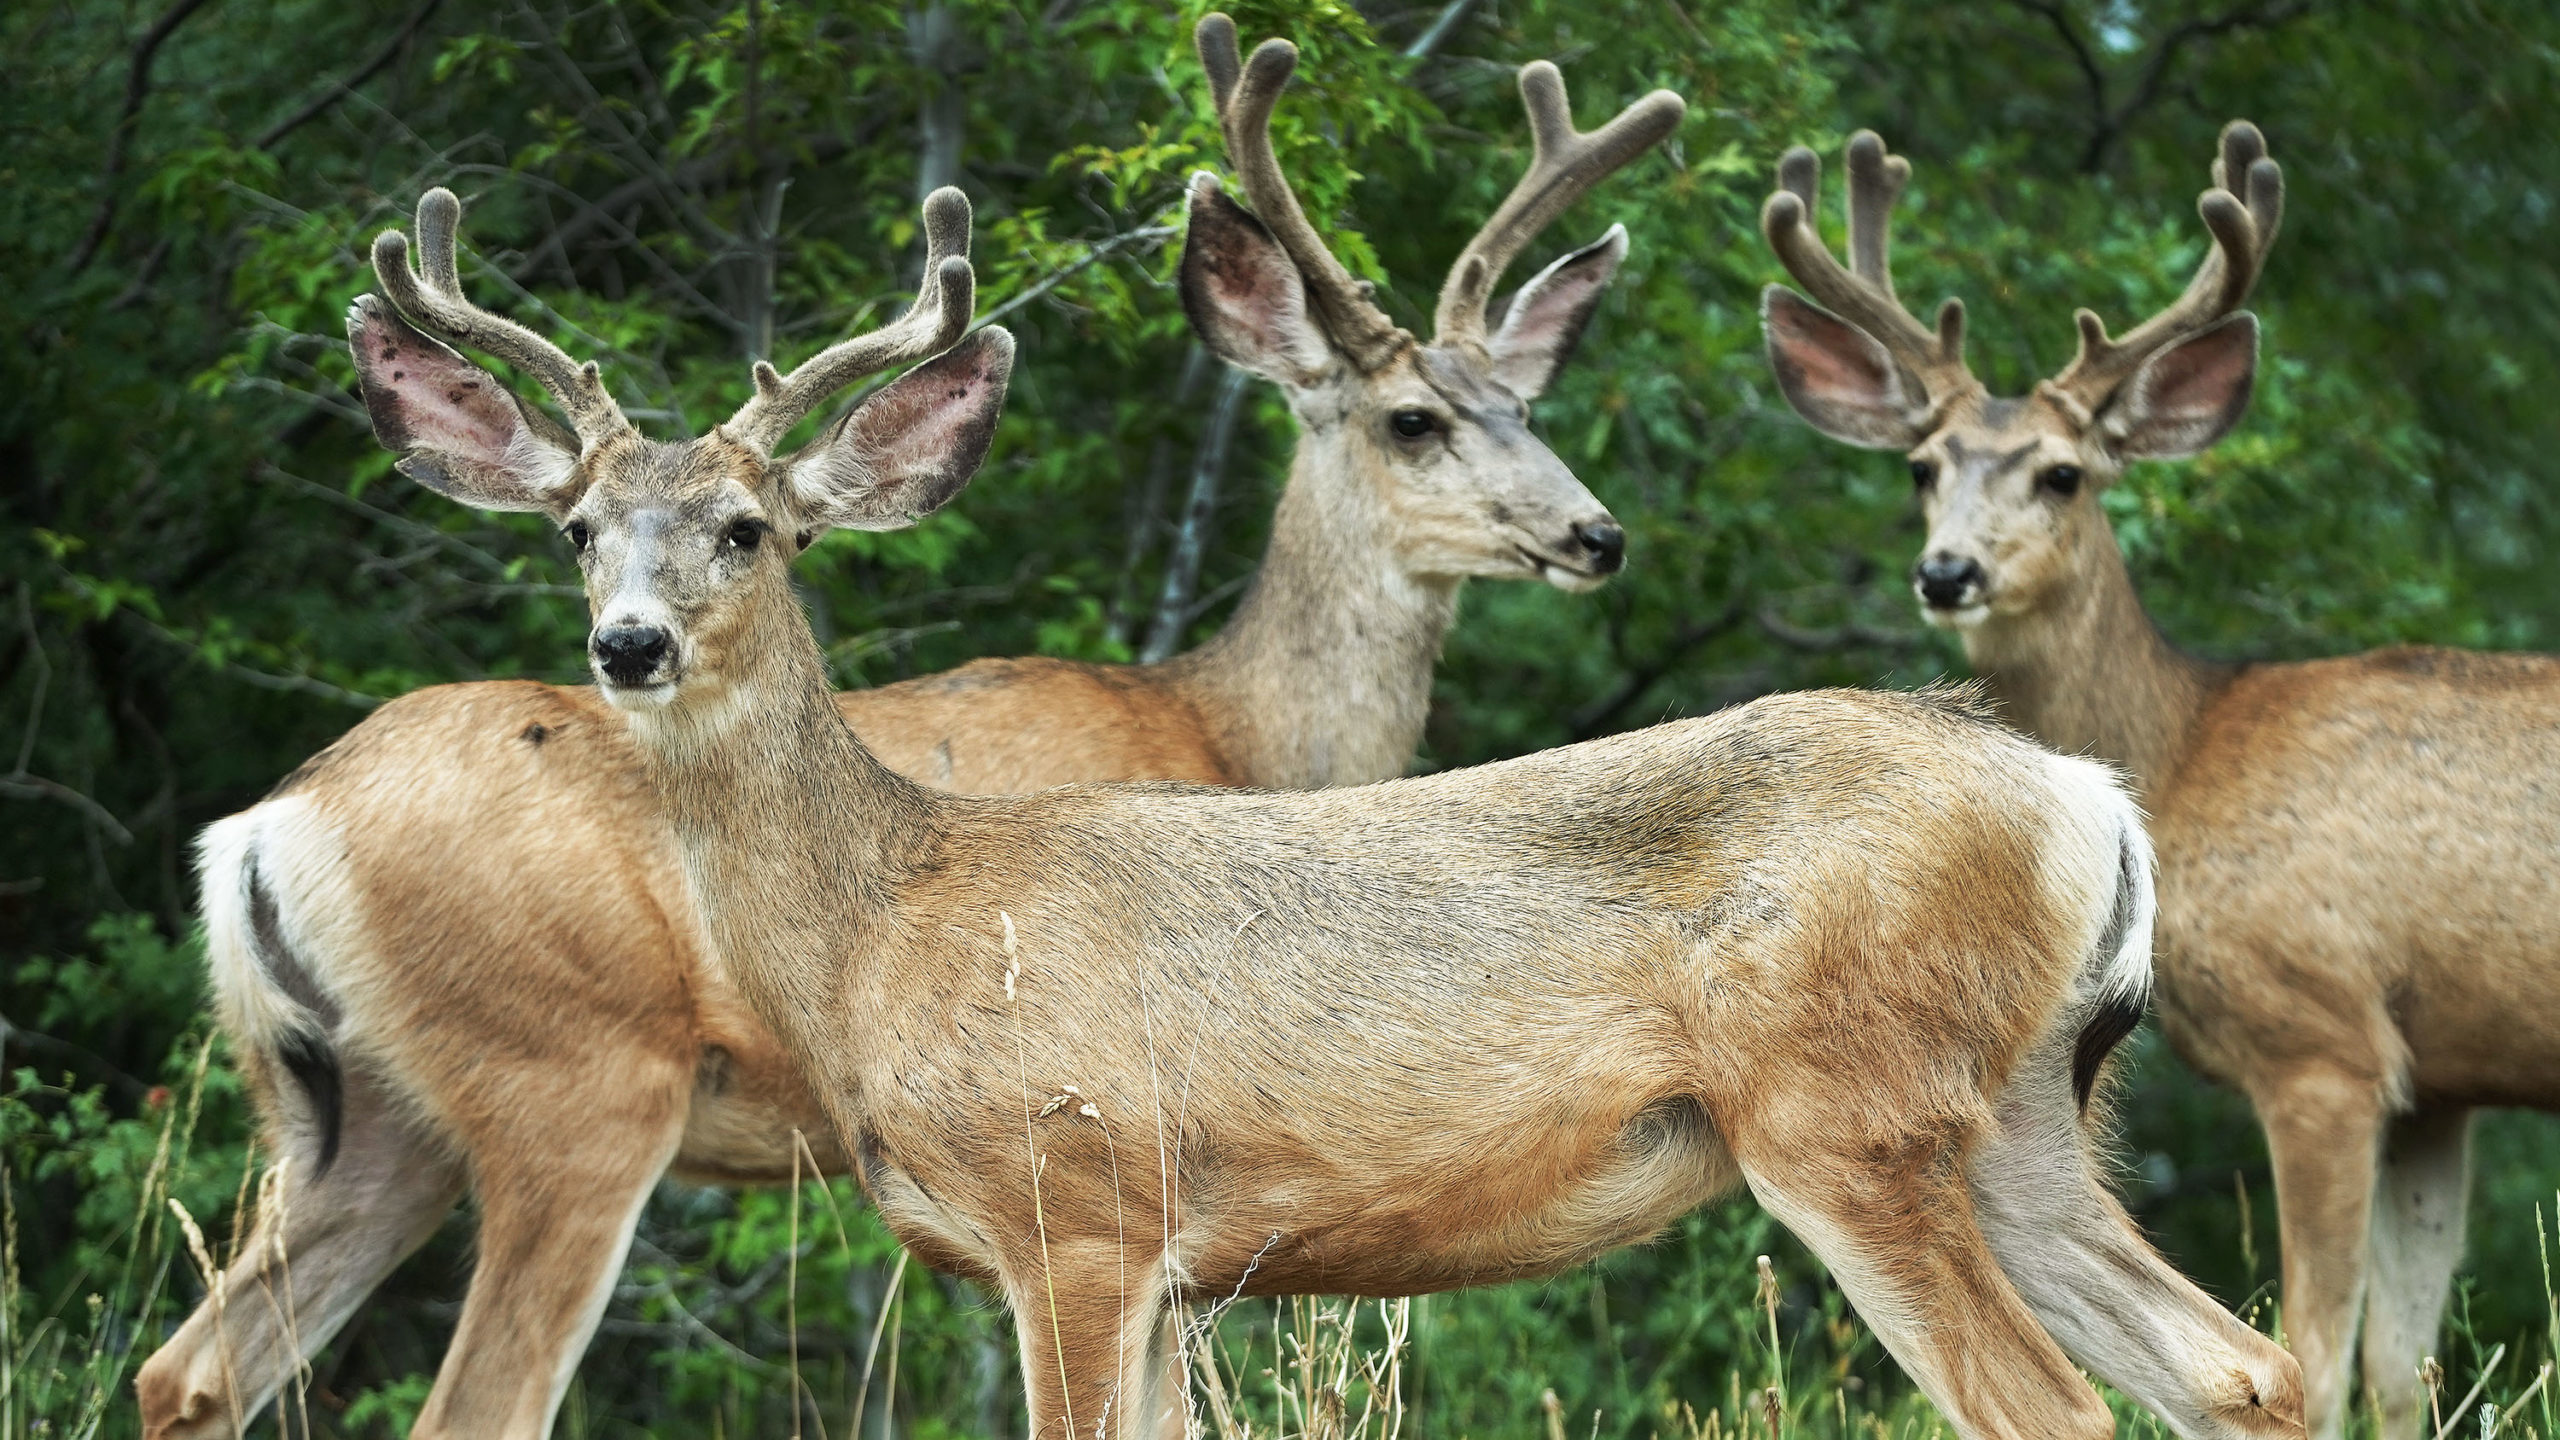 Three deer are pictured, aggressive deer have wildlife officials giving warnings...